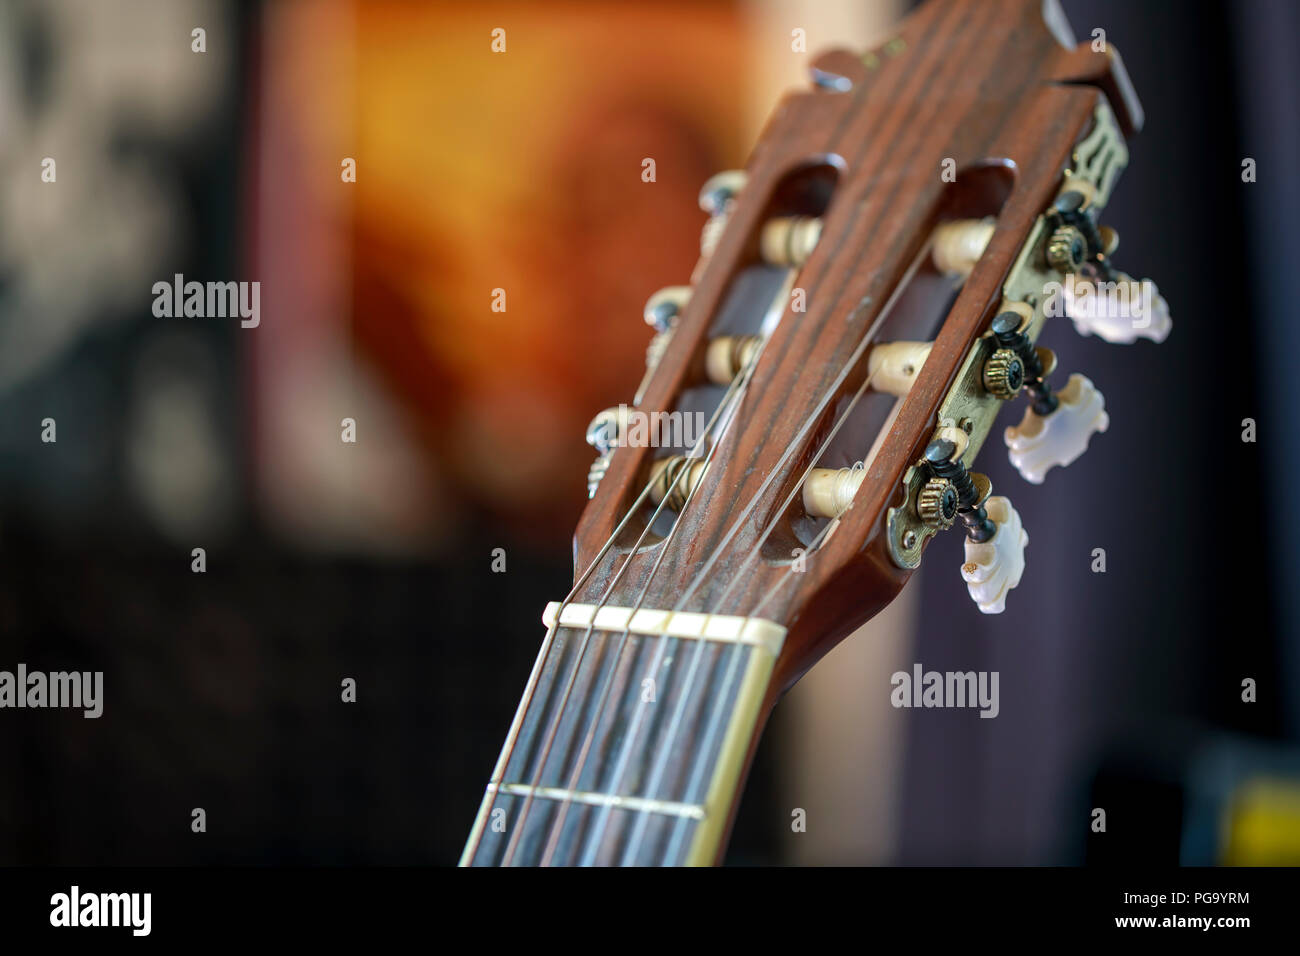 Acoustic guitar head stock with strings and tuning keys Stock Photo